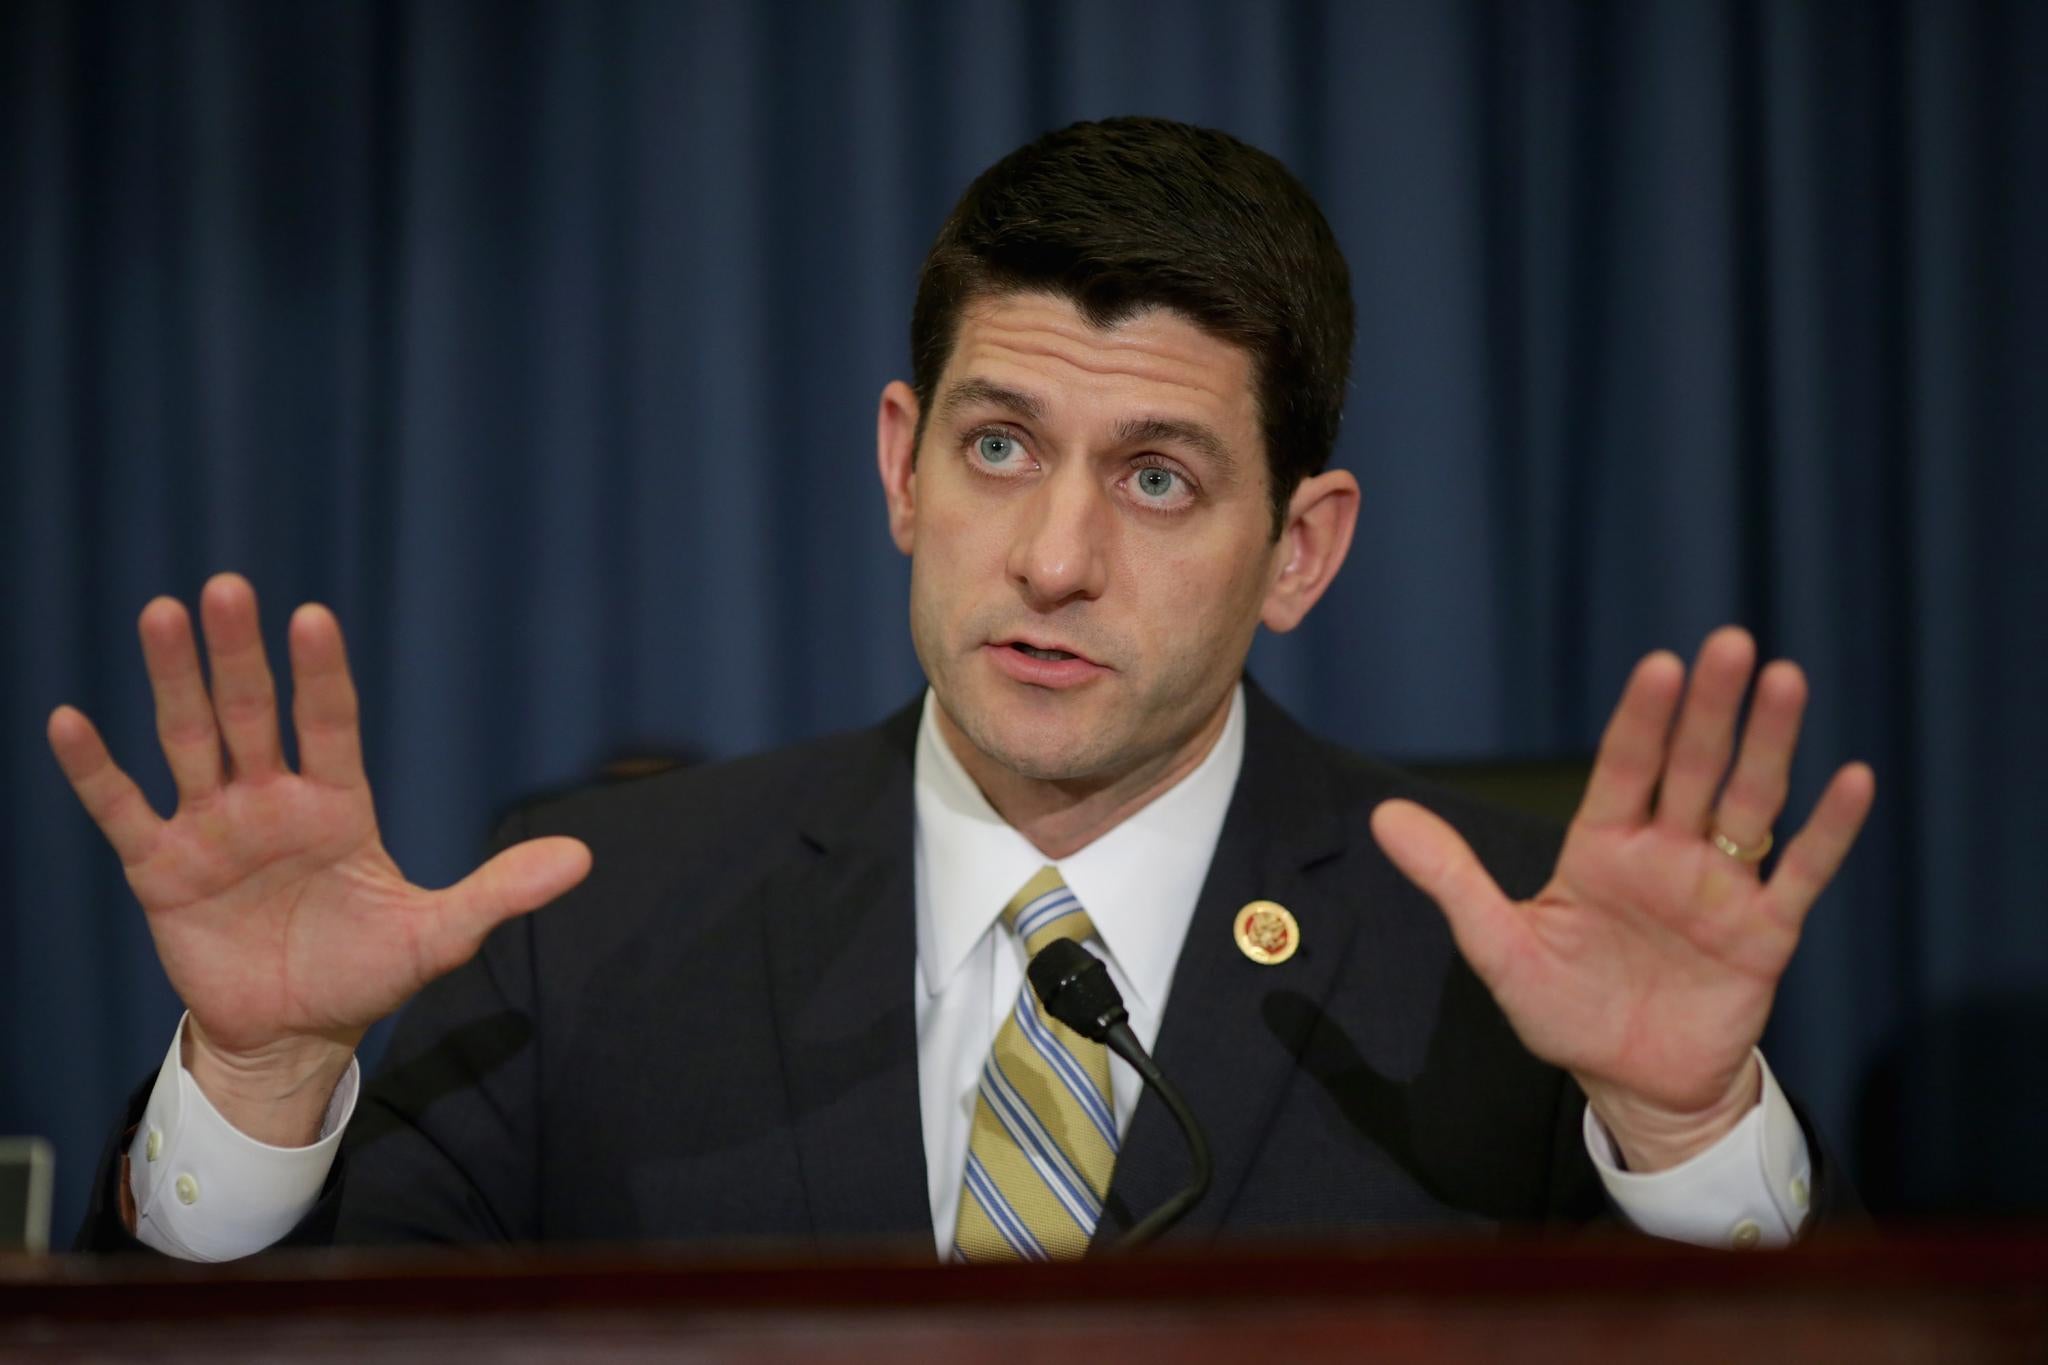 A Closer Look At Paul Ryan's Statement on Lazy 'Inner City' Men